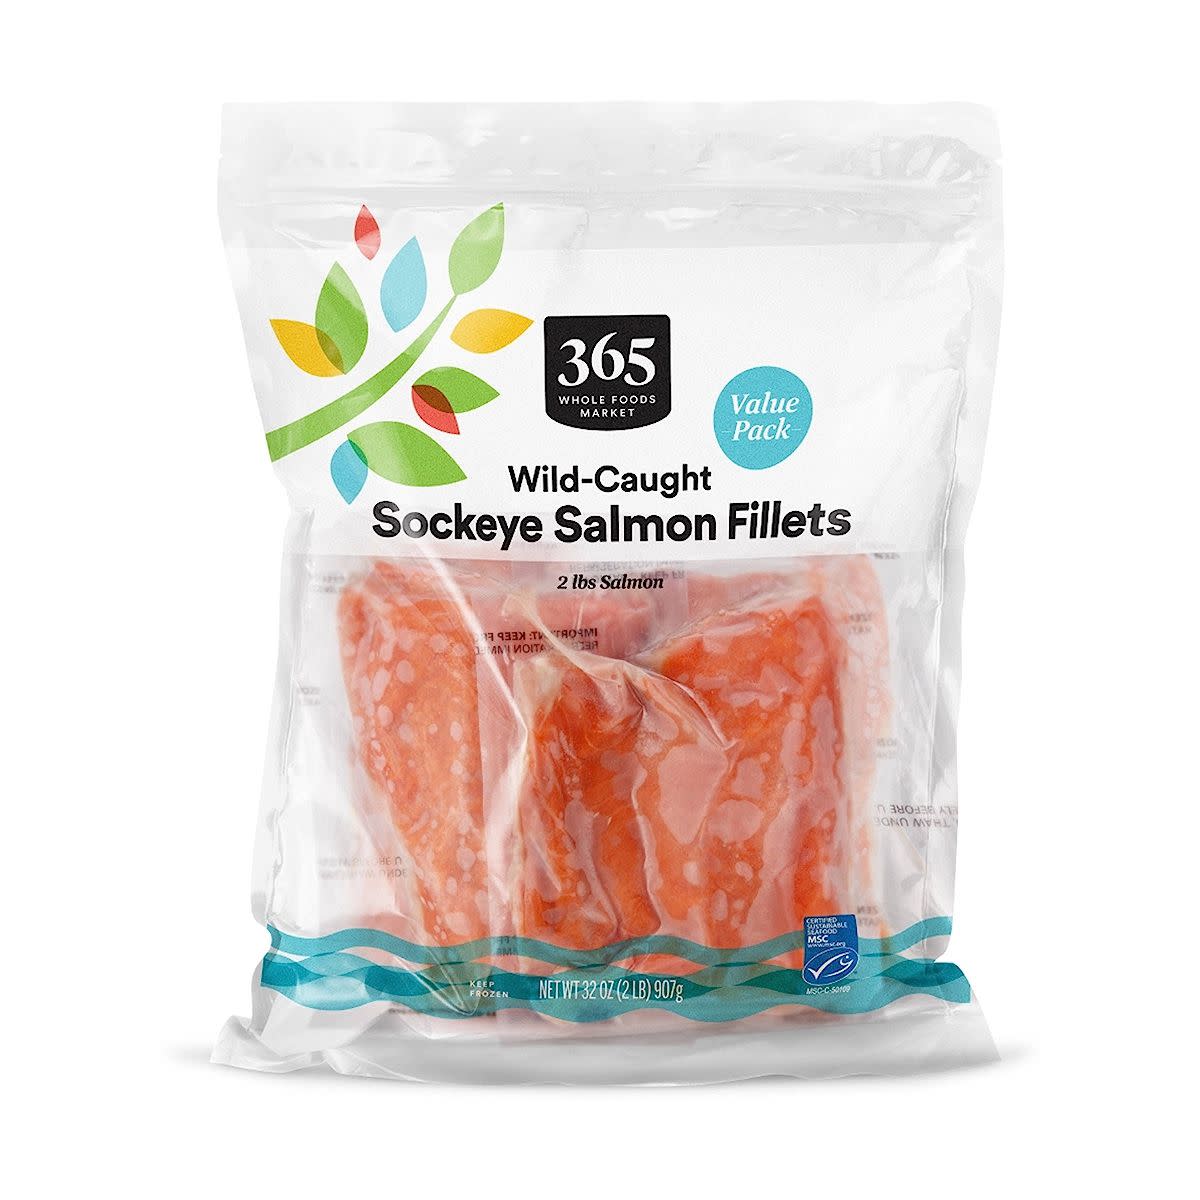 Bag of Whole Foods 365 Wild-Caught Salmon Fillets